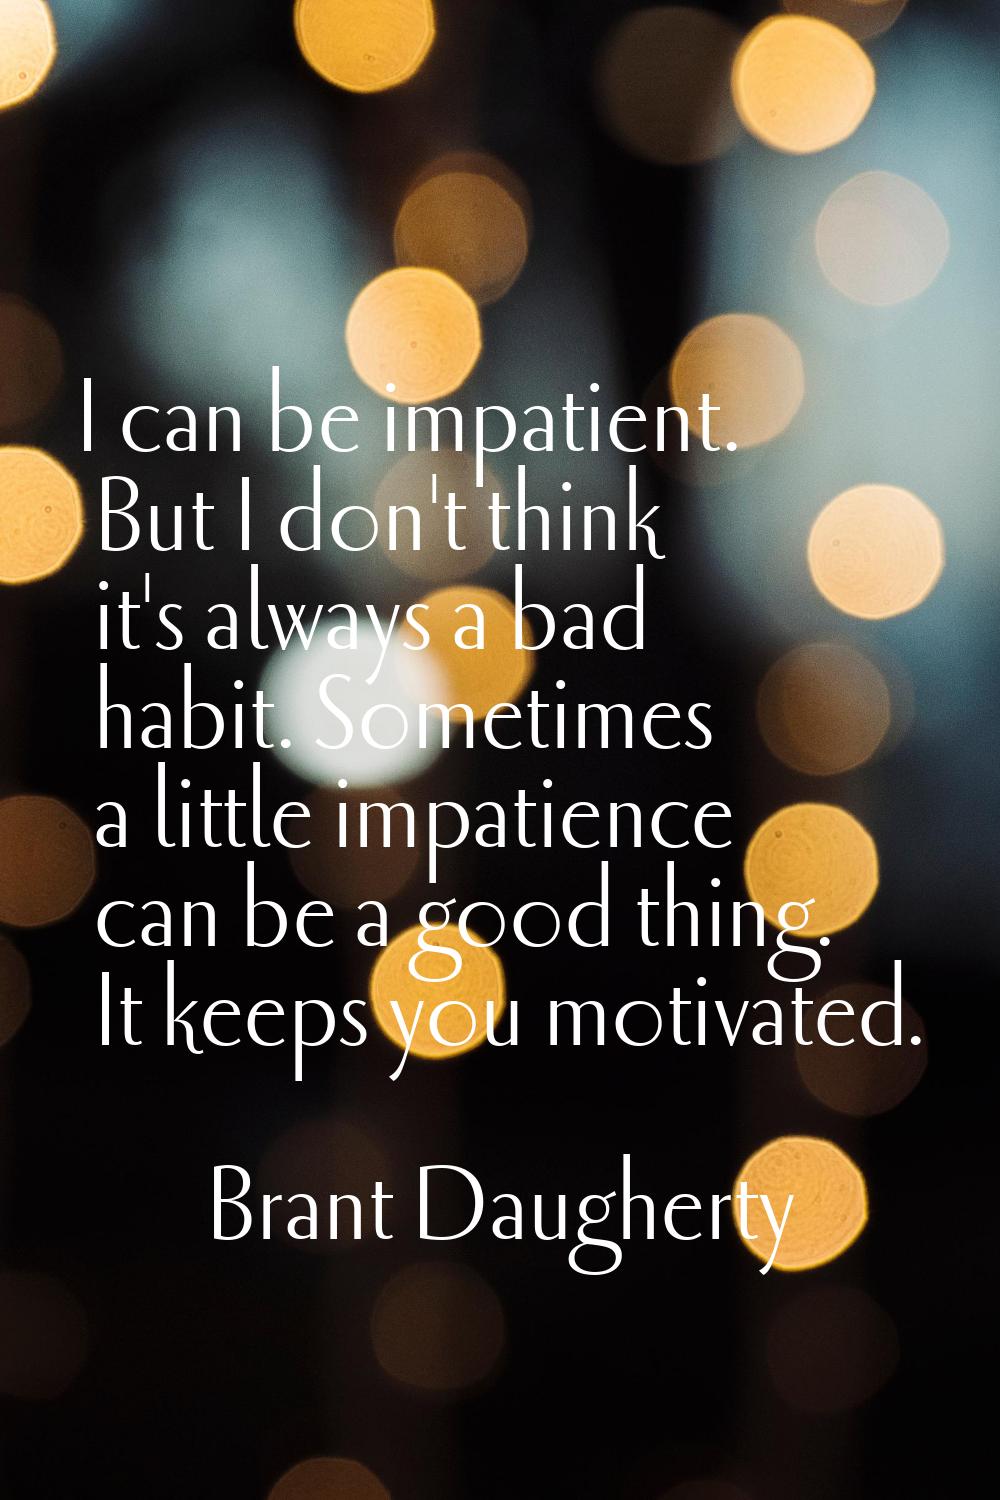 I can be impatient. But I don't think it's always a bad habit. Sometimes a little impatience can be